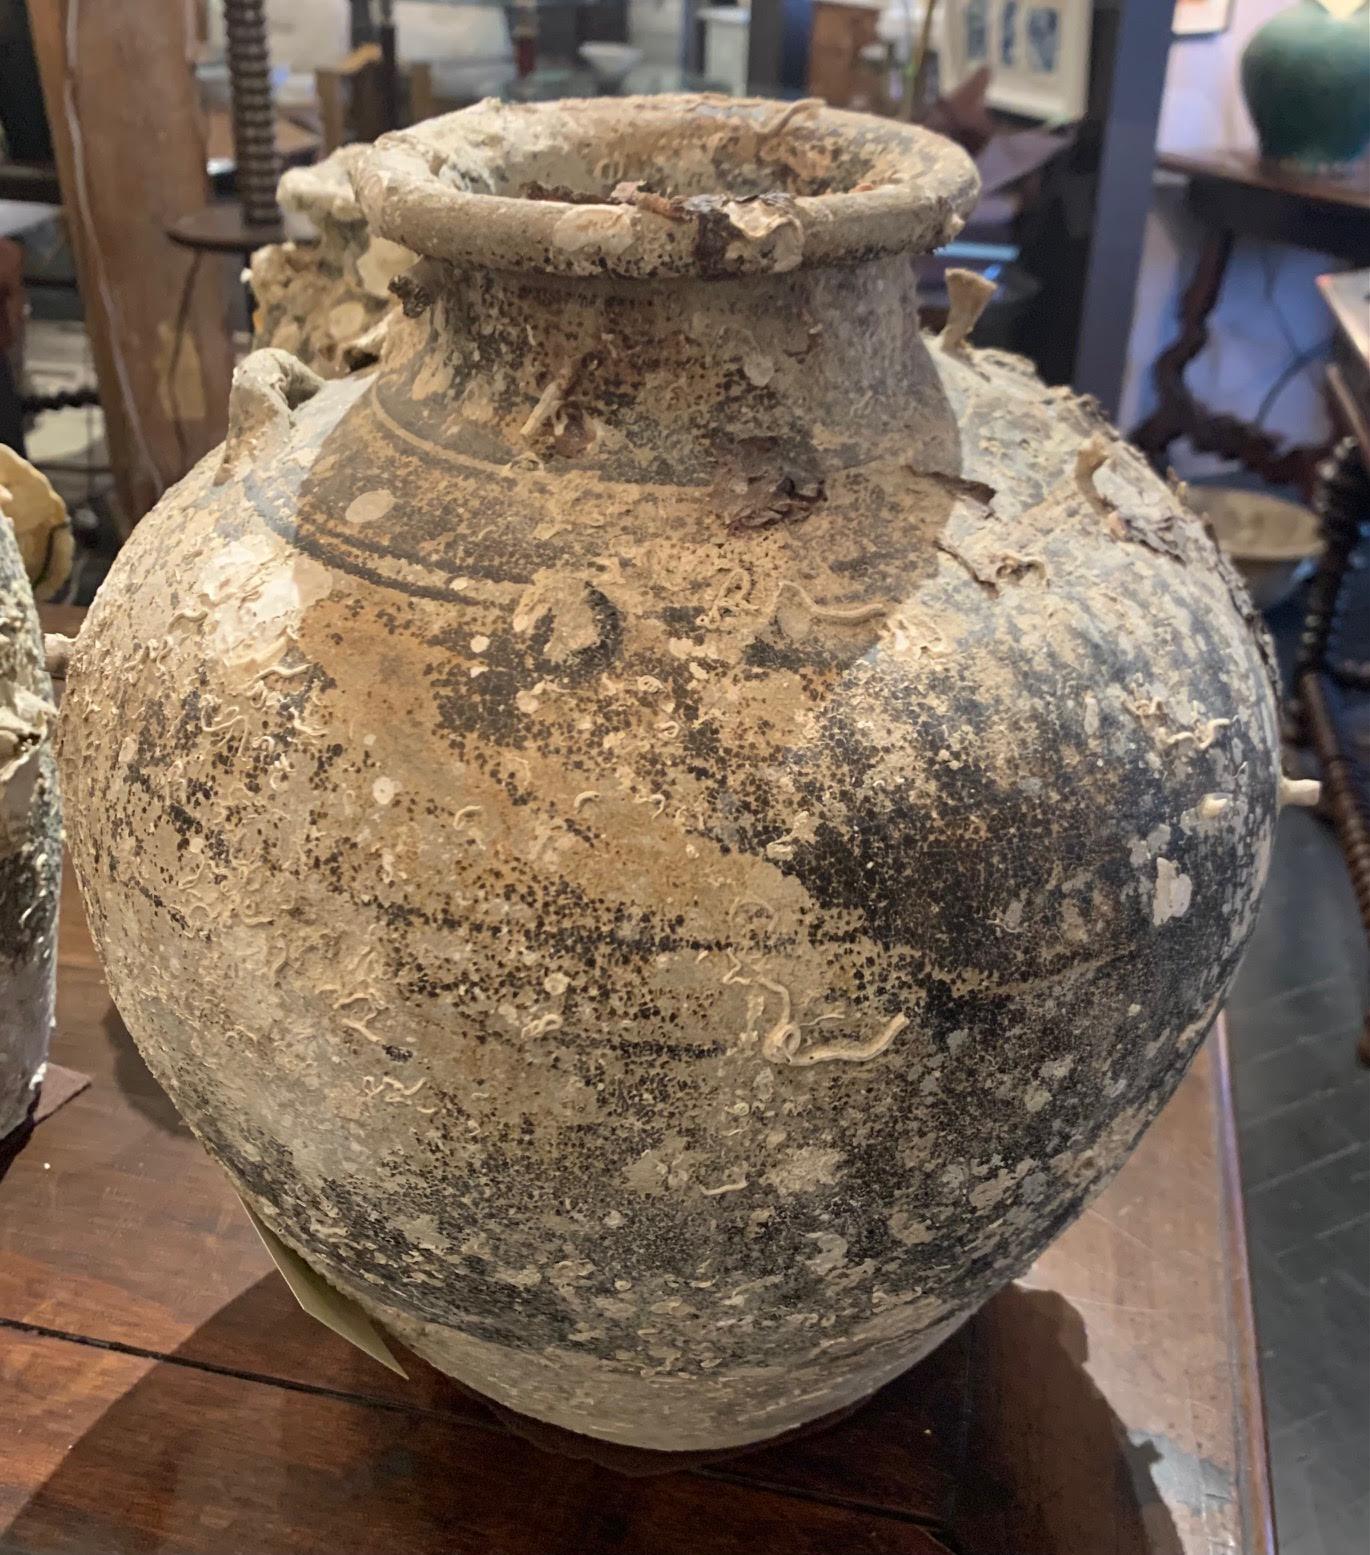 16th century Thailand Sawankhalok ship wreck vase.
Beautiful and abundant fossil growth from being submerged under water.
Distinct natural patina.
    